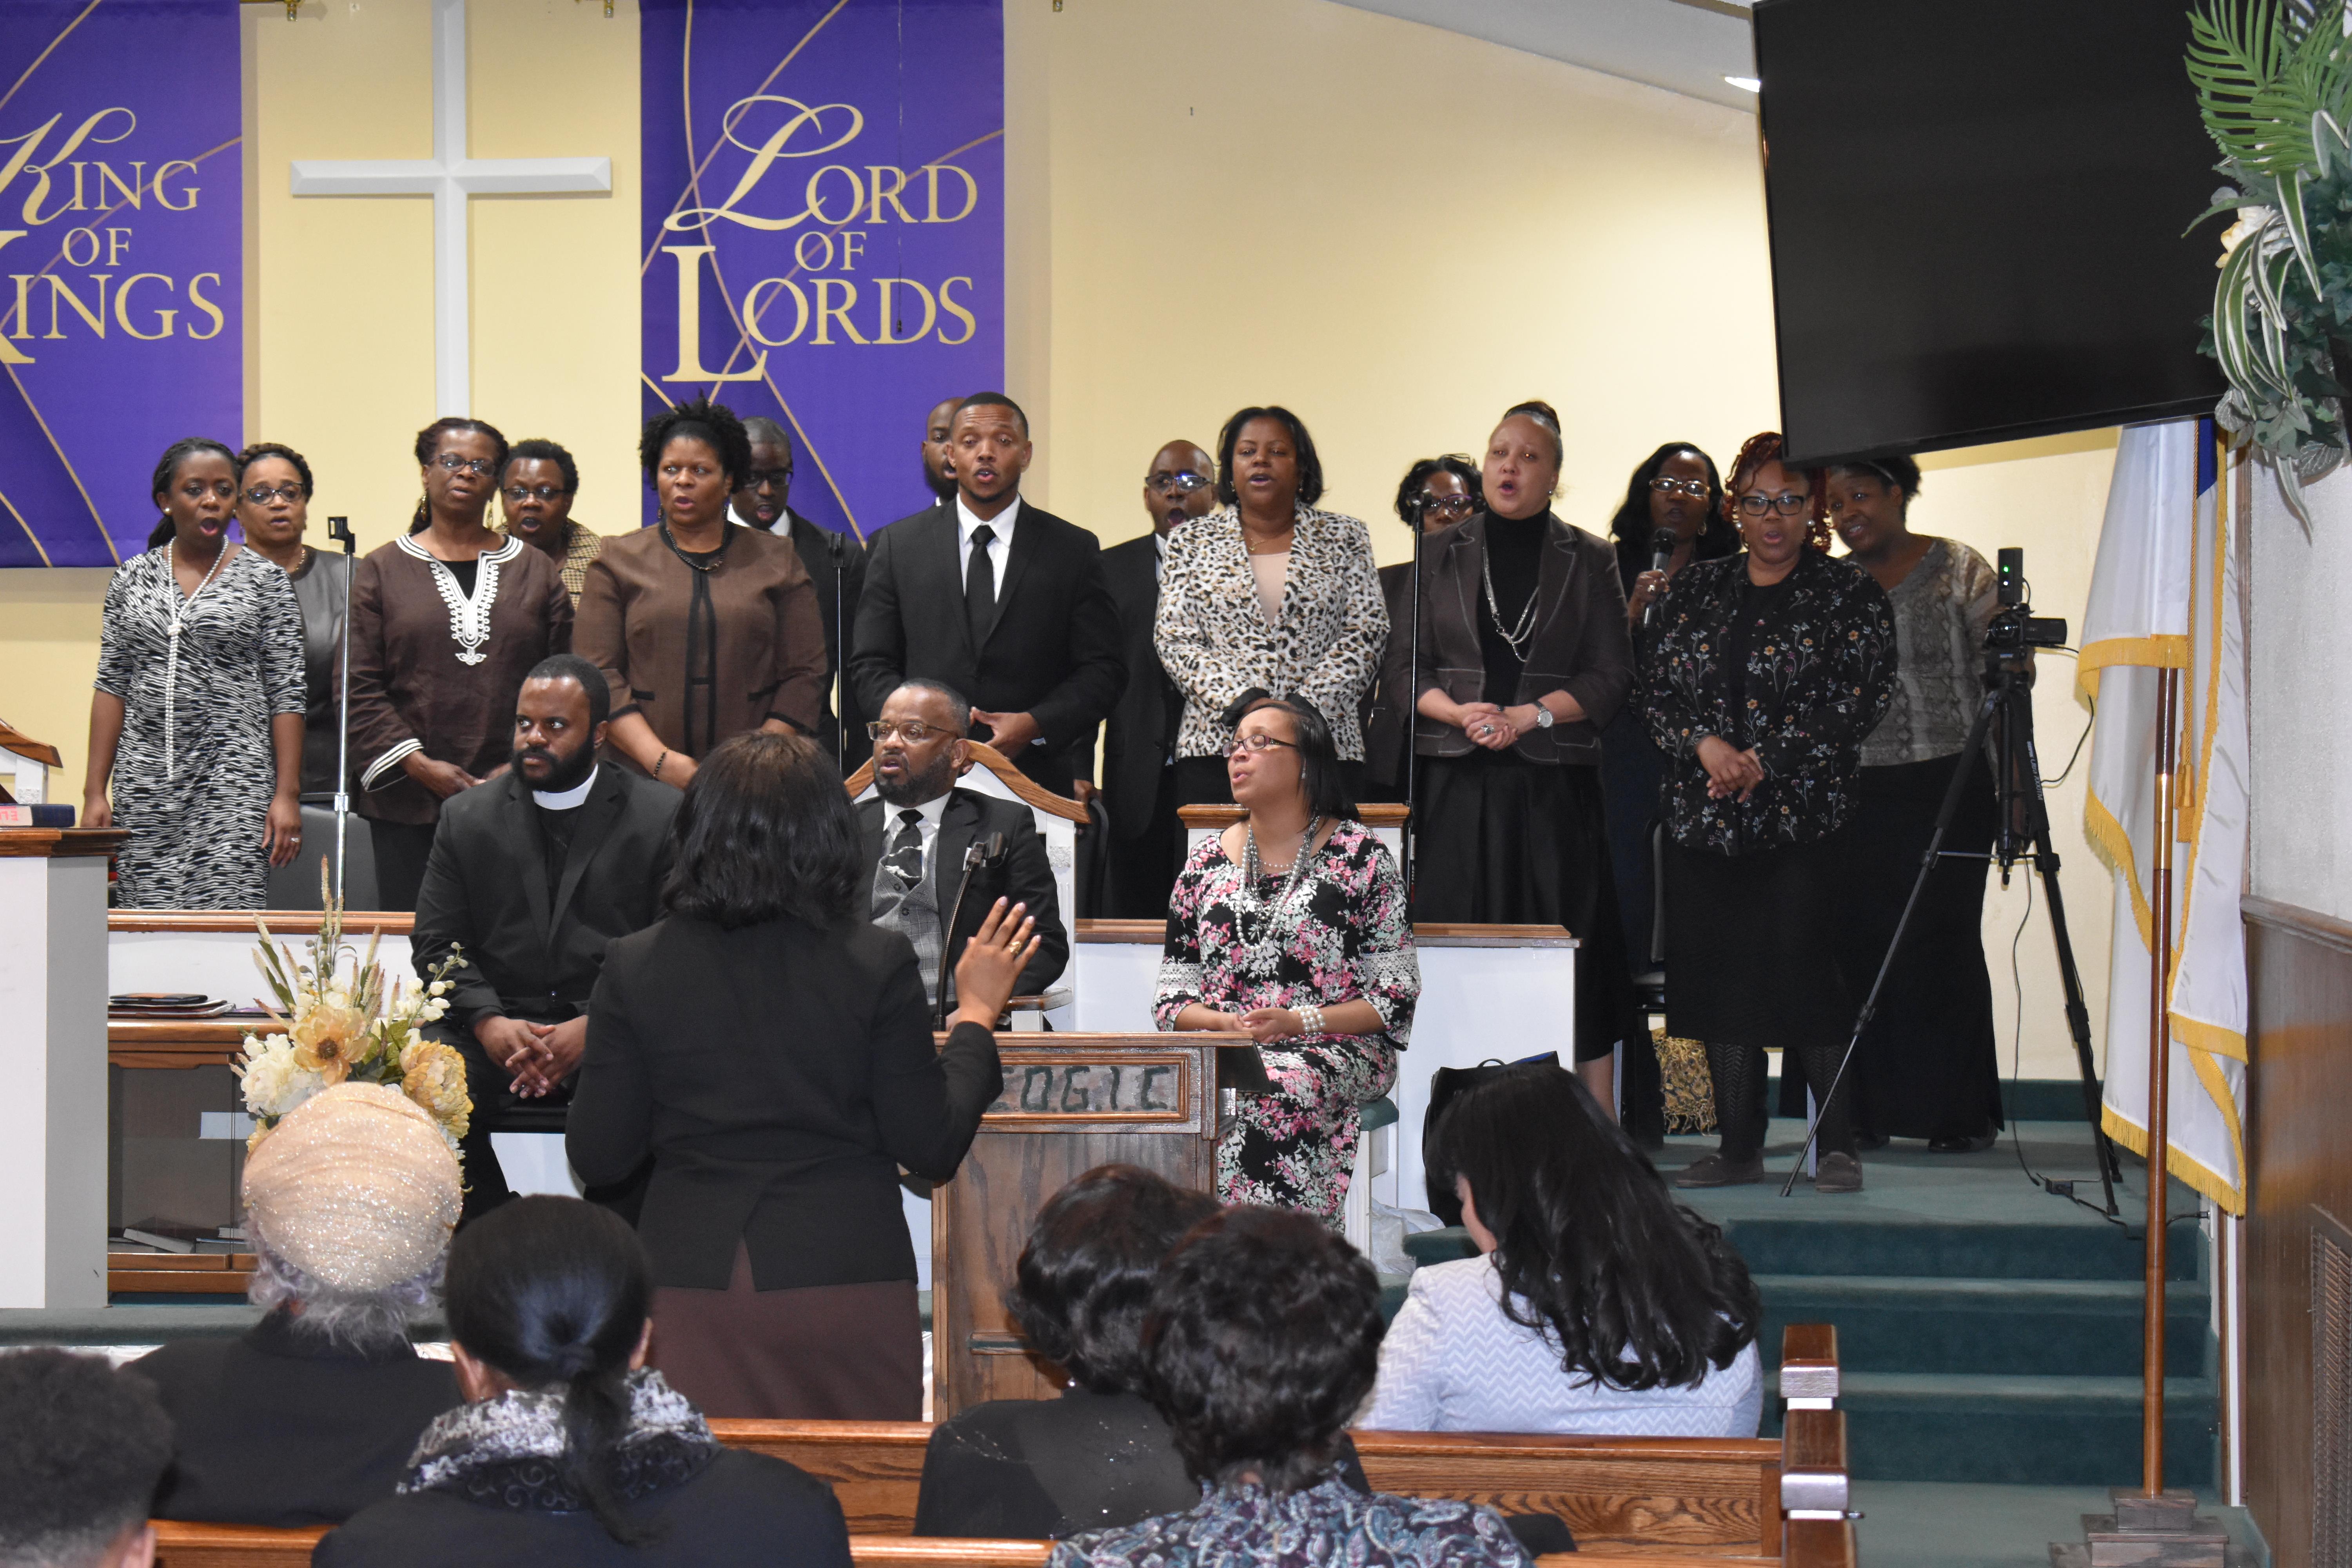 PASTOR PRUITTE: HOLINESS TABERNACLE COGIC